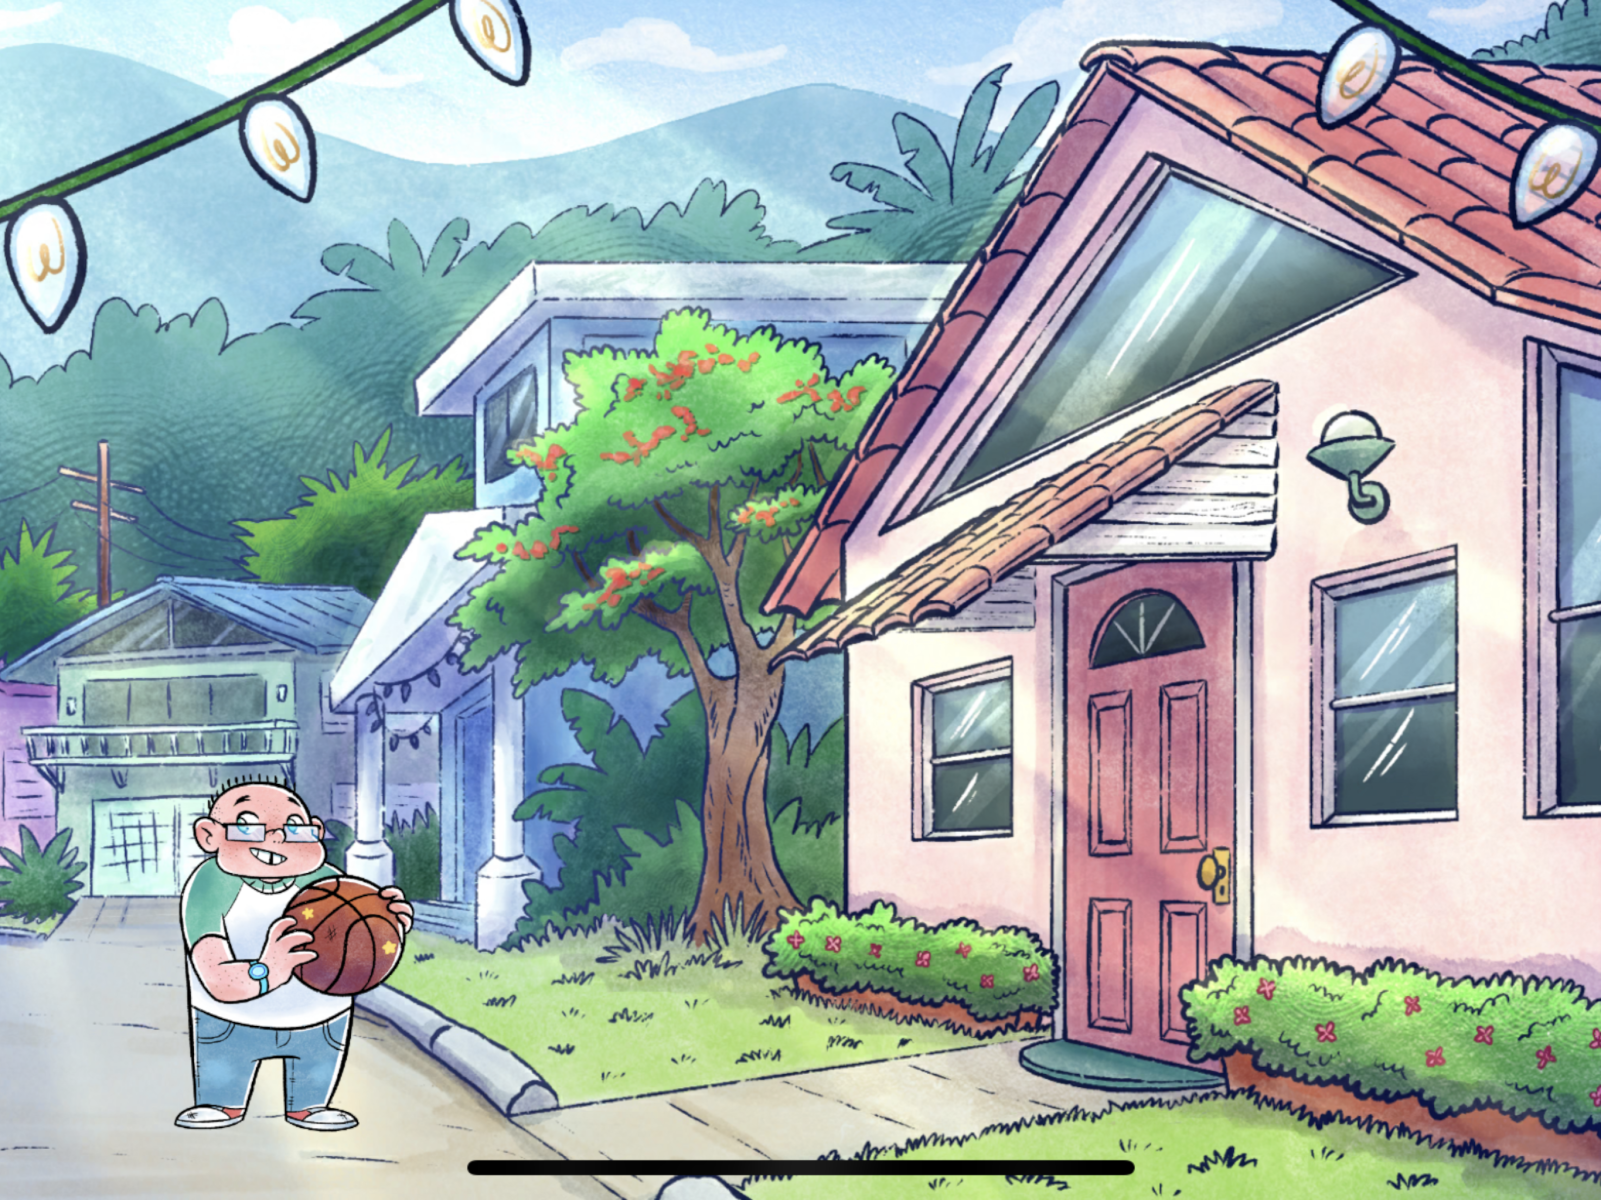 An animated boy standing outside a house on a quiet street